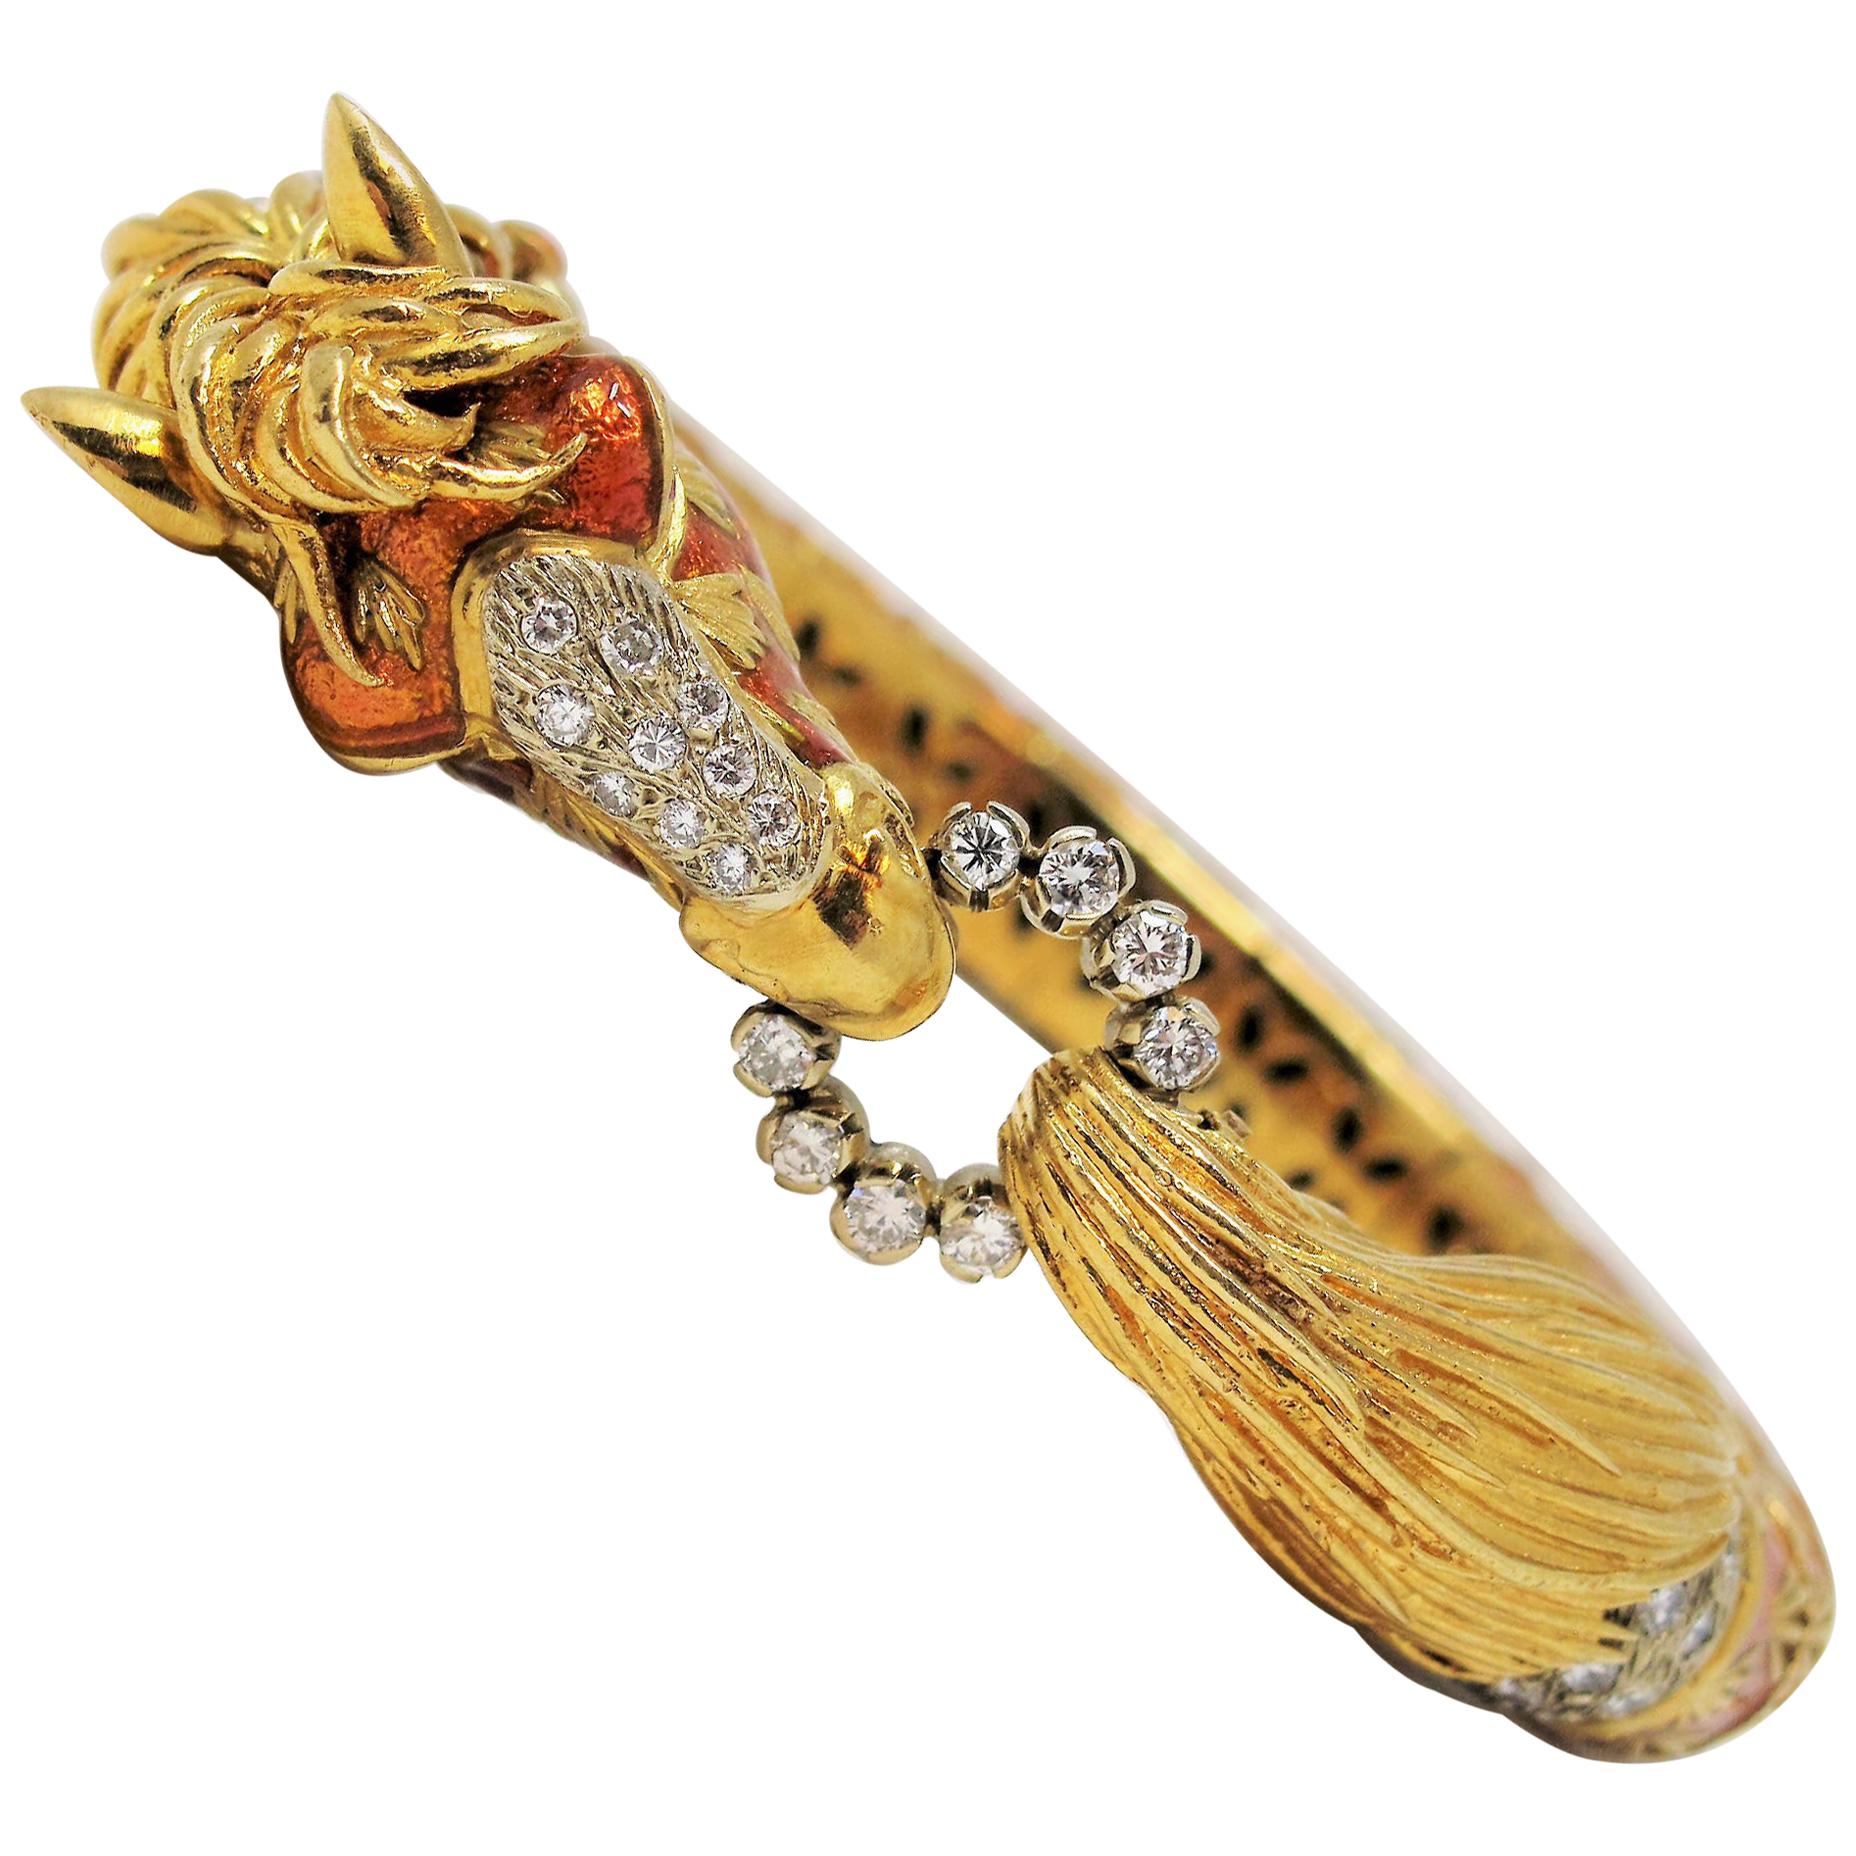 Calling all equestrian lovers! This incredible horse head bangle bracelet by Frascarolo is truly a wearable work of art.  Featuring an intricately carved 18 karat yellow gold and enamel design, accented by icy white diamonds, this rare and